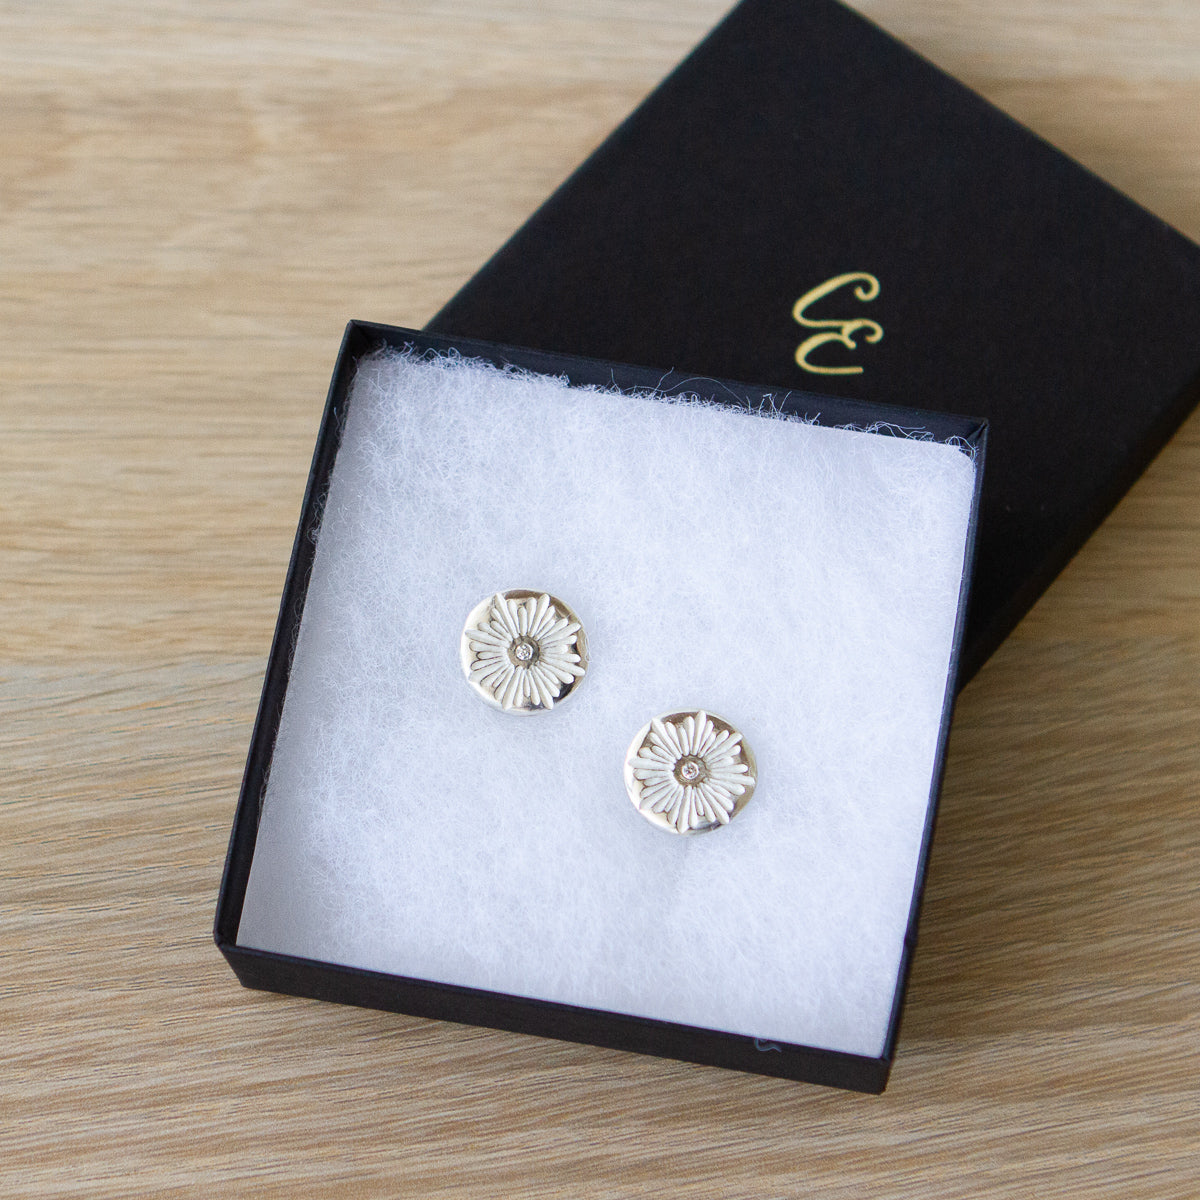 Sterling silver round cufflinks with a floral carved sunburst design and diamond centers in a gift box